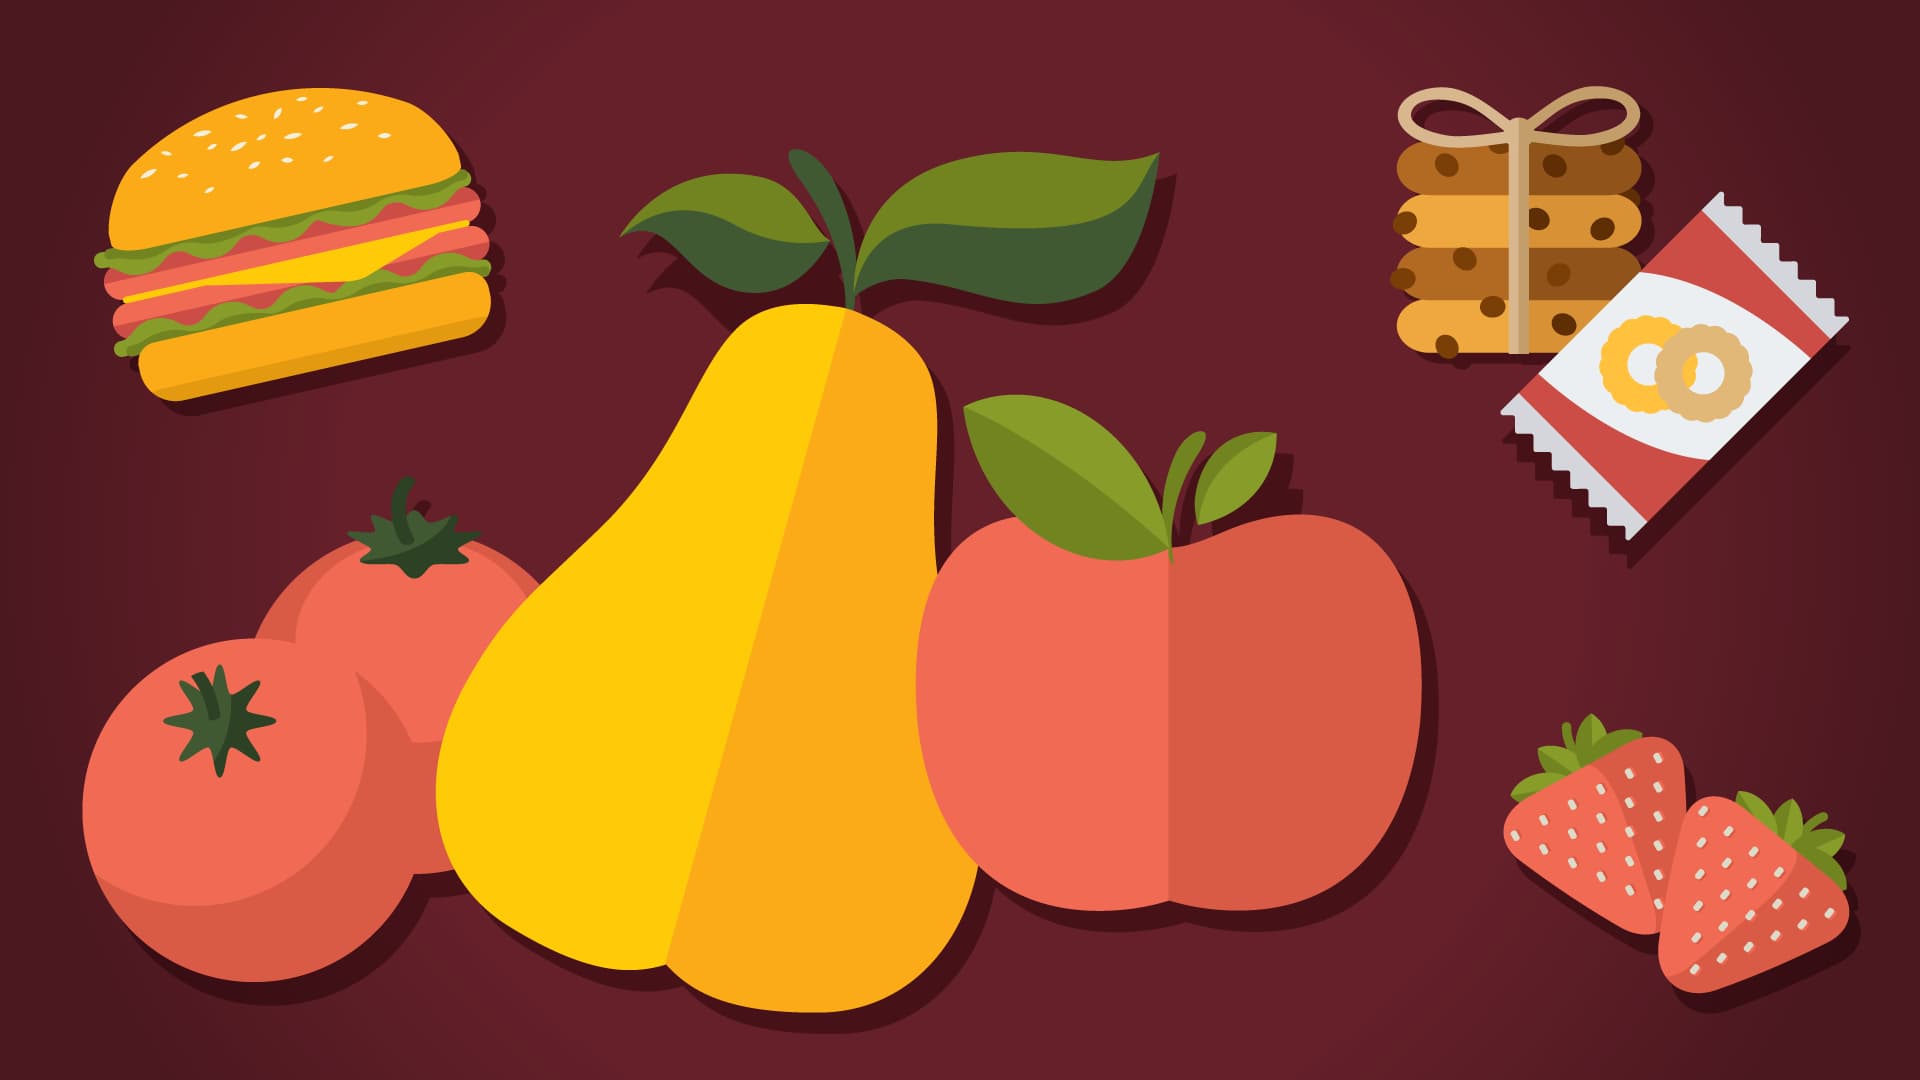 Illustration of fruit, a burger, cookies